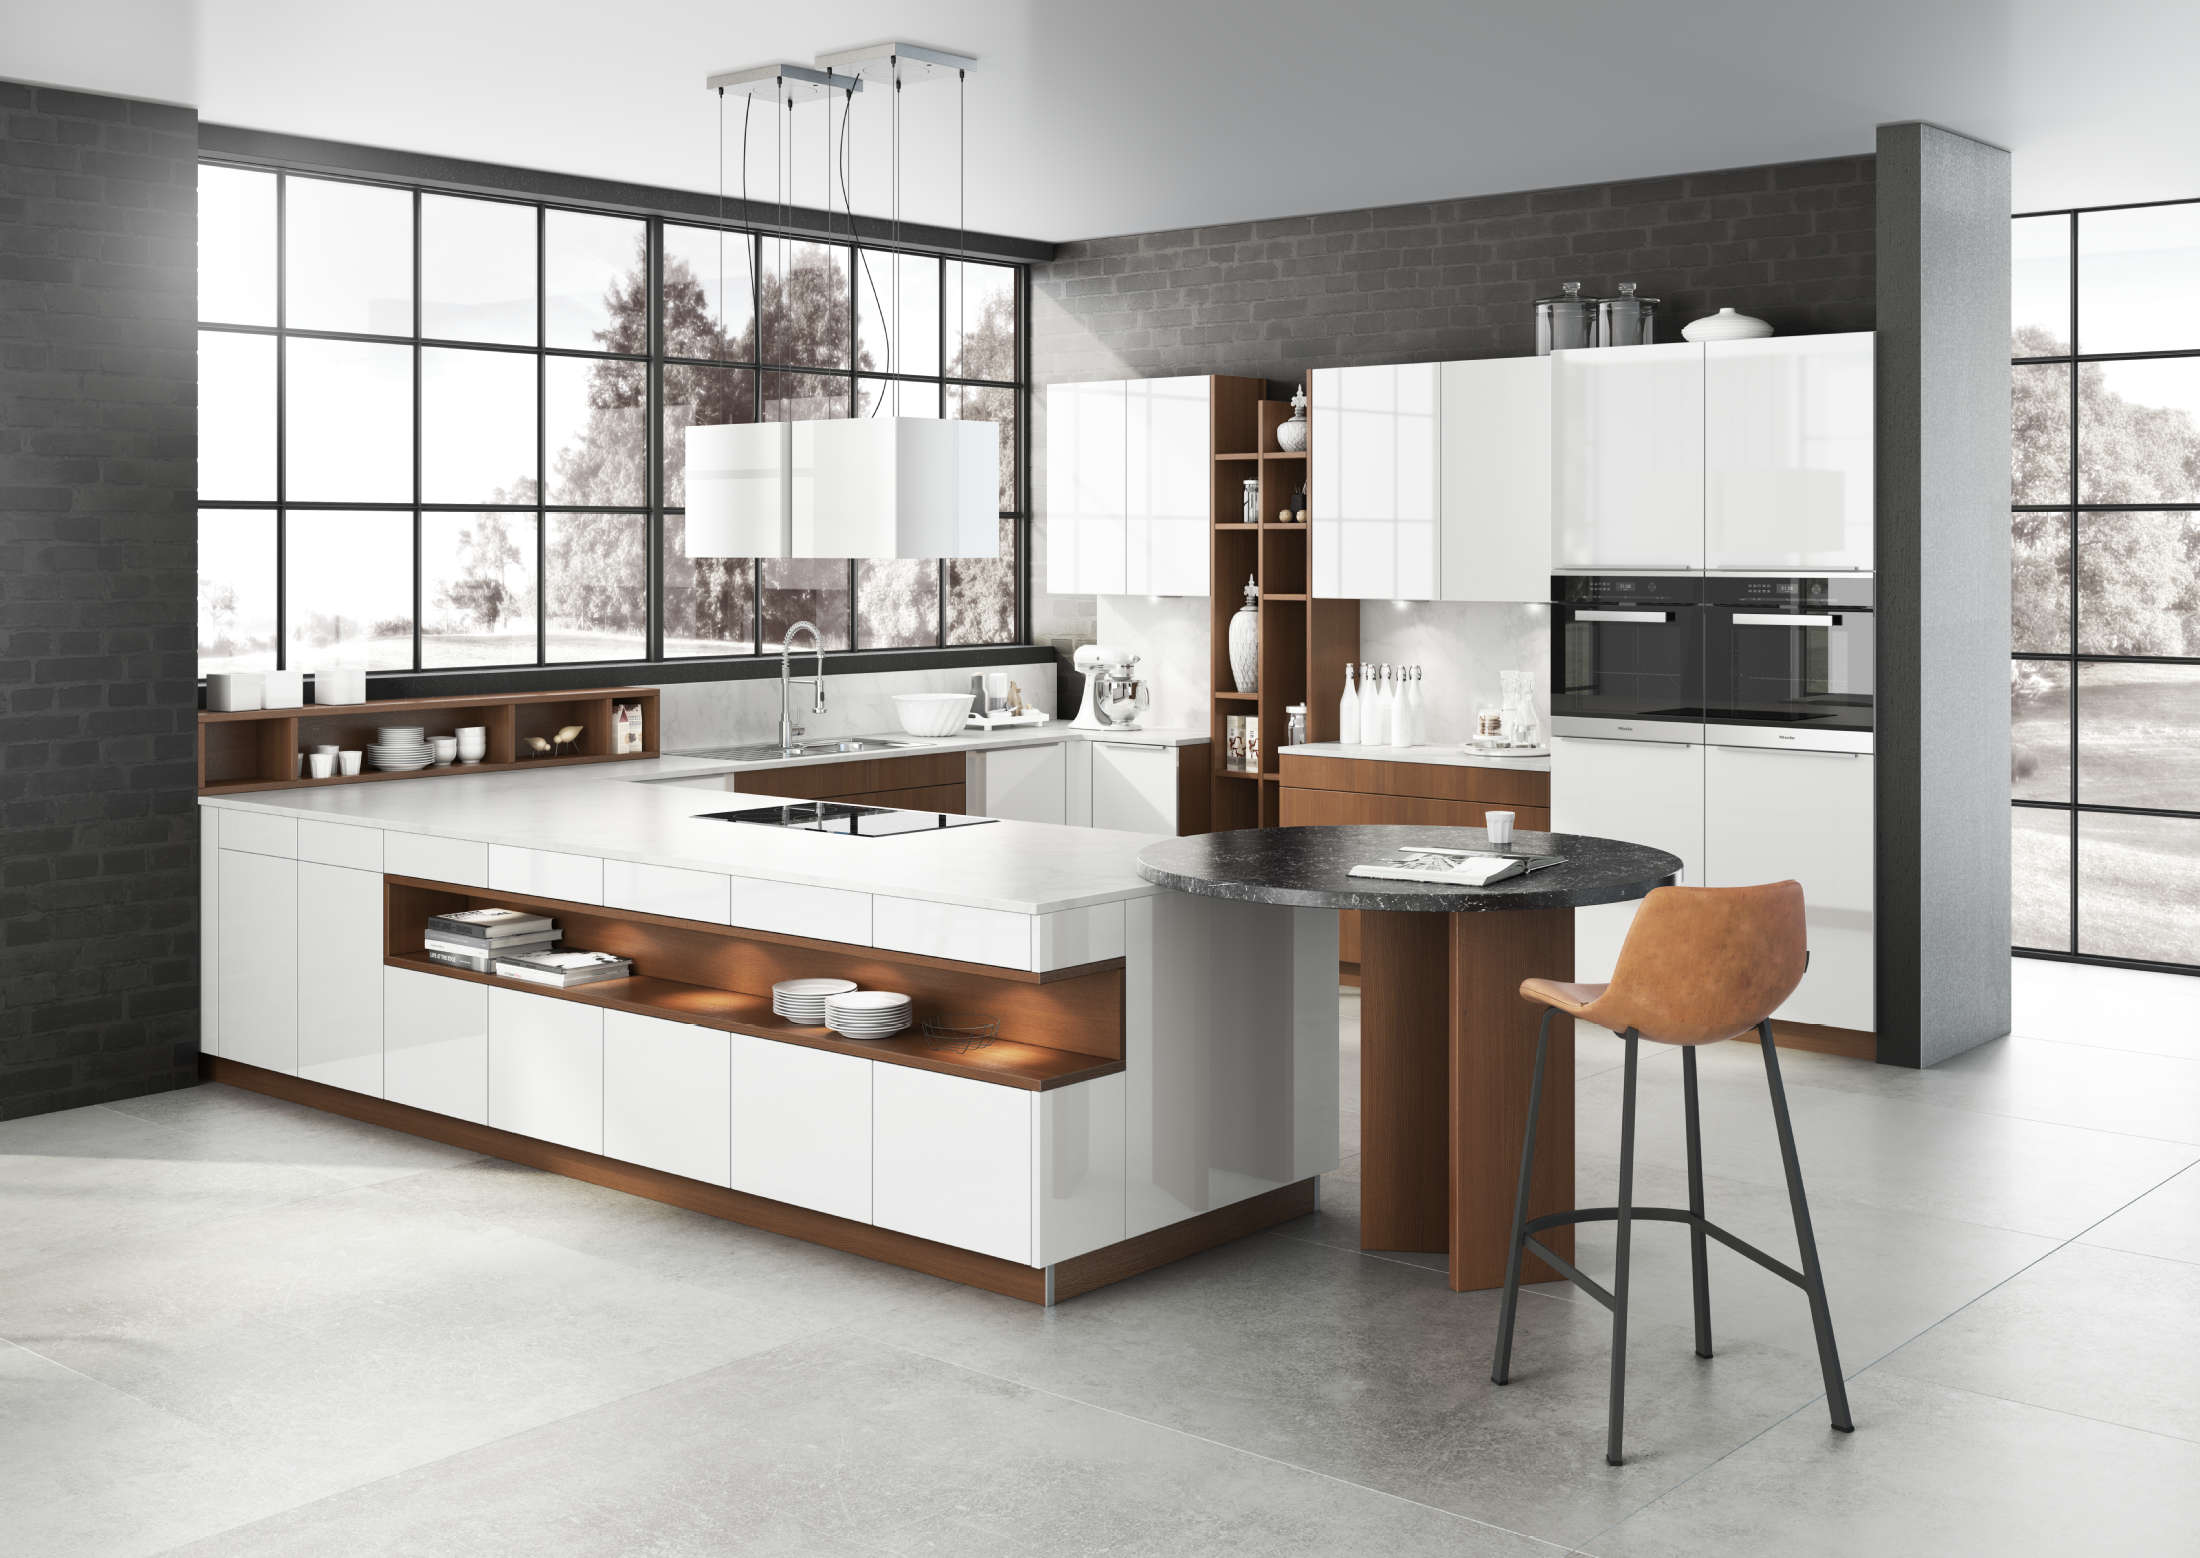 High-Gloss Acrylic Kitchen Cabinets: A Sleek and Modern Choice for Your Home